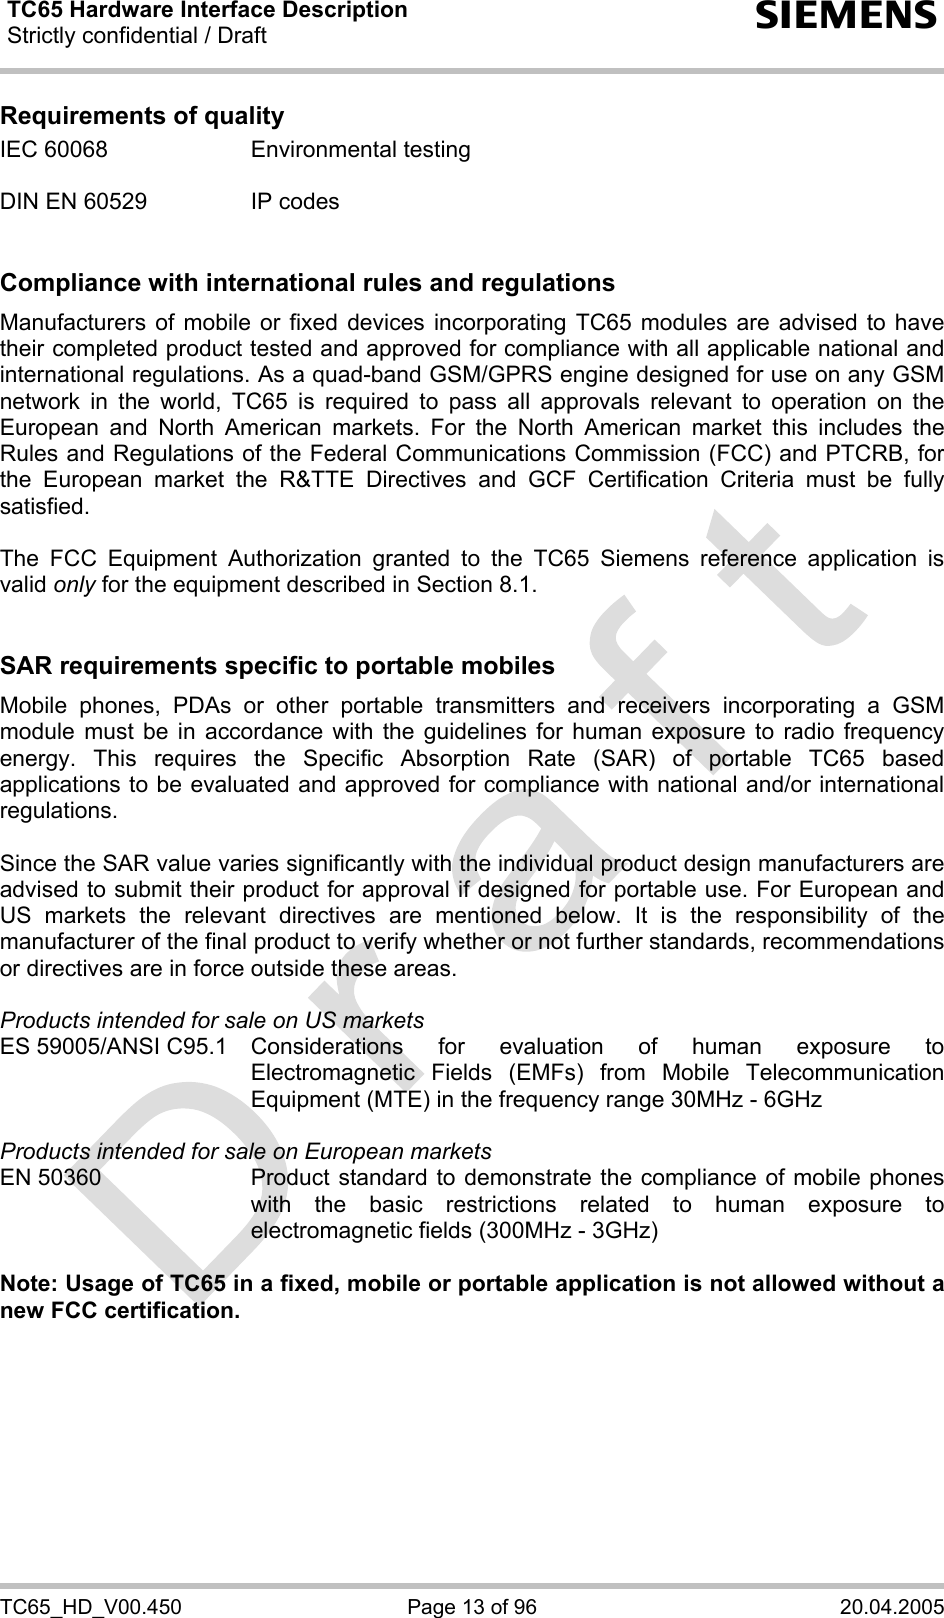 TC65 Hardware Interface Description Strictly confidential / Draft  s TC65_HD_V00.450  Page 13 of 96  20.04.2005 Requirements of quality IEC 60068  Environmental testing  DIN EN 60529  IP codes   Compliance with international rules and regulations Manufacturers of mobile or fixed devices incorporating TC65 modules are advised to have their completed product tested and approved for compliance with all applicable national and international regulations. As a quad-band GSM/GPRS engine designed for use on any GSM network in the world, TC65 is required to pass all approvals relevant to operation on the European and North American markets. For the North American market this includes the Rules and Regulations of the Federal Communications Commission (FCC) and PTCRB, for the European market the R&amp;TTE Directives and GCF Certification Criteria must be fully satisfied.  The FCC Equipment Authorization granted to the TC65 Siemens reference application is valid only for the equipment described in Section 8.1.   SAR requirements specific to portable mobiles Mobile phones, PDAs or other portable transmitters and receivers incorporating a GSM module must be in accordance with the guidelines for human exposure to radio frequency energy. This requires the Specific Absorption Rate (SAR) of portable TC65 based applications to be evaluated and approved for compliance with national and/or international regulations.   Since the SAR value varies significantly with the individual product design manufacturers are advised to submit their product for approval if designed for portable use. For European and US markets the relevant directives are mentioned below. It is the responsibility of the manufacturer of the final product to verify whether or not further standards, recommendations or directives are in force outside these areas.   Products intended for sale on US markets ES 59005/ANSI C95.1 Considerations for evaluation of human exposure to Electromagnetic Fields (EMFs) from Mobile Telecommunication Equipment (MTE) in the frequency range 30MHz - 6GHz   Products intended for sale on European markets EN 50360  Product standard to demonstrate the compliance of mobile phones with the basic restrictions related to human exposure to electromagnetic fields (300MHz - 3GHz)  Note: Usage of TC65 in a fixed, mobile or portable application is not allowed without a new FCC certification.  